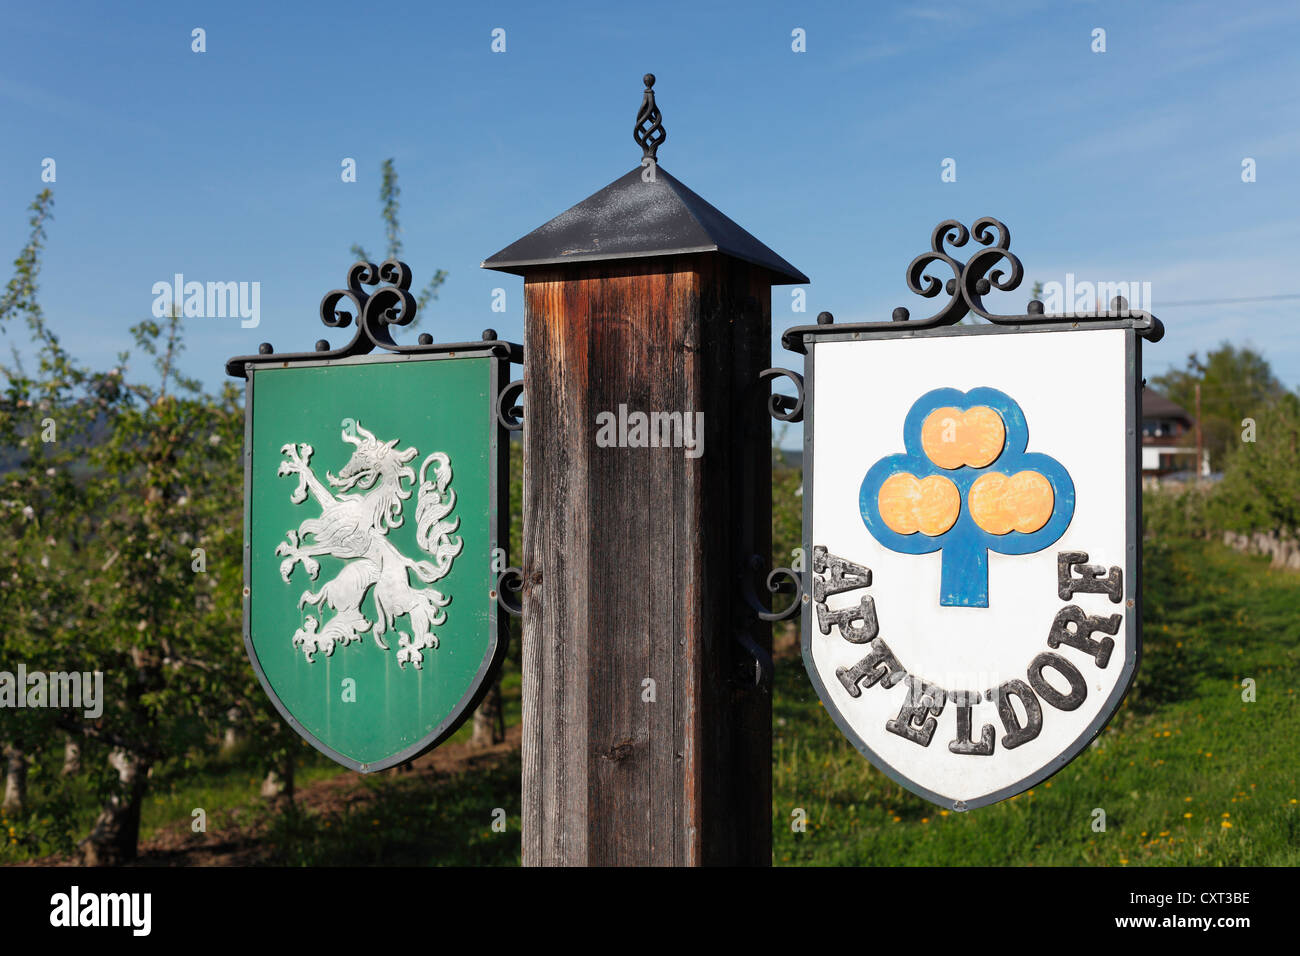 Styrian coat of arms and sign 'Apfeldorf', apple village, Puch near Weiz, East Styria, Styria, Austria, Europe, PublicGround Stock Photo